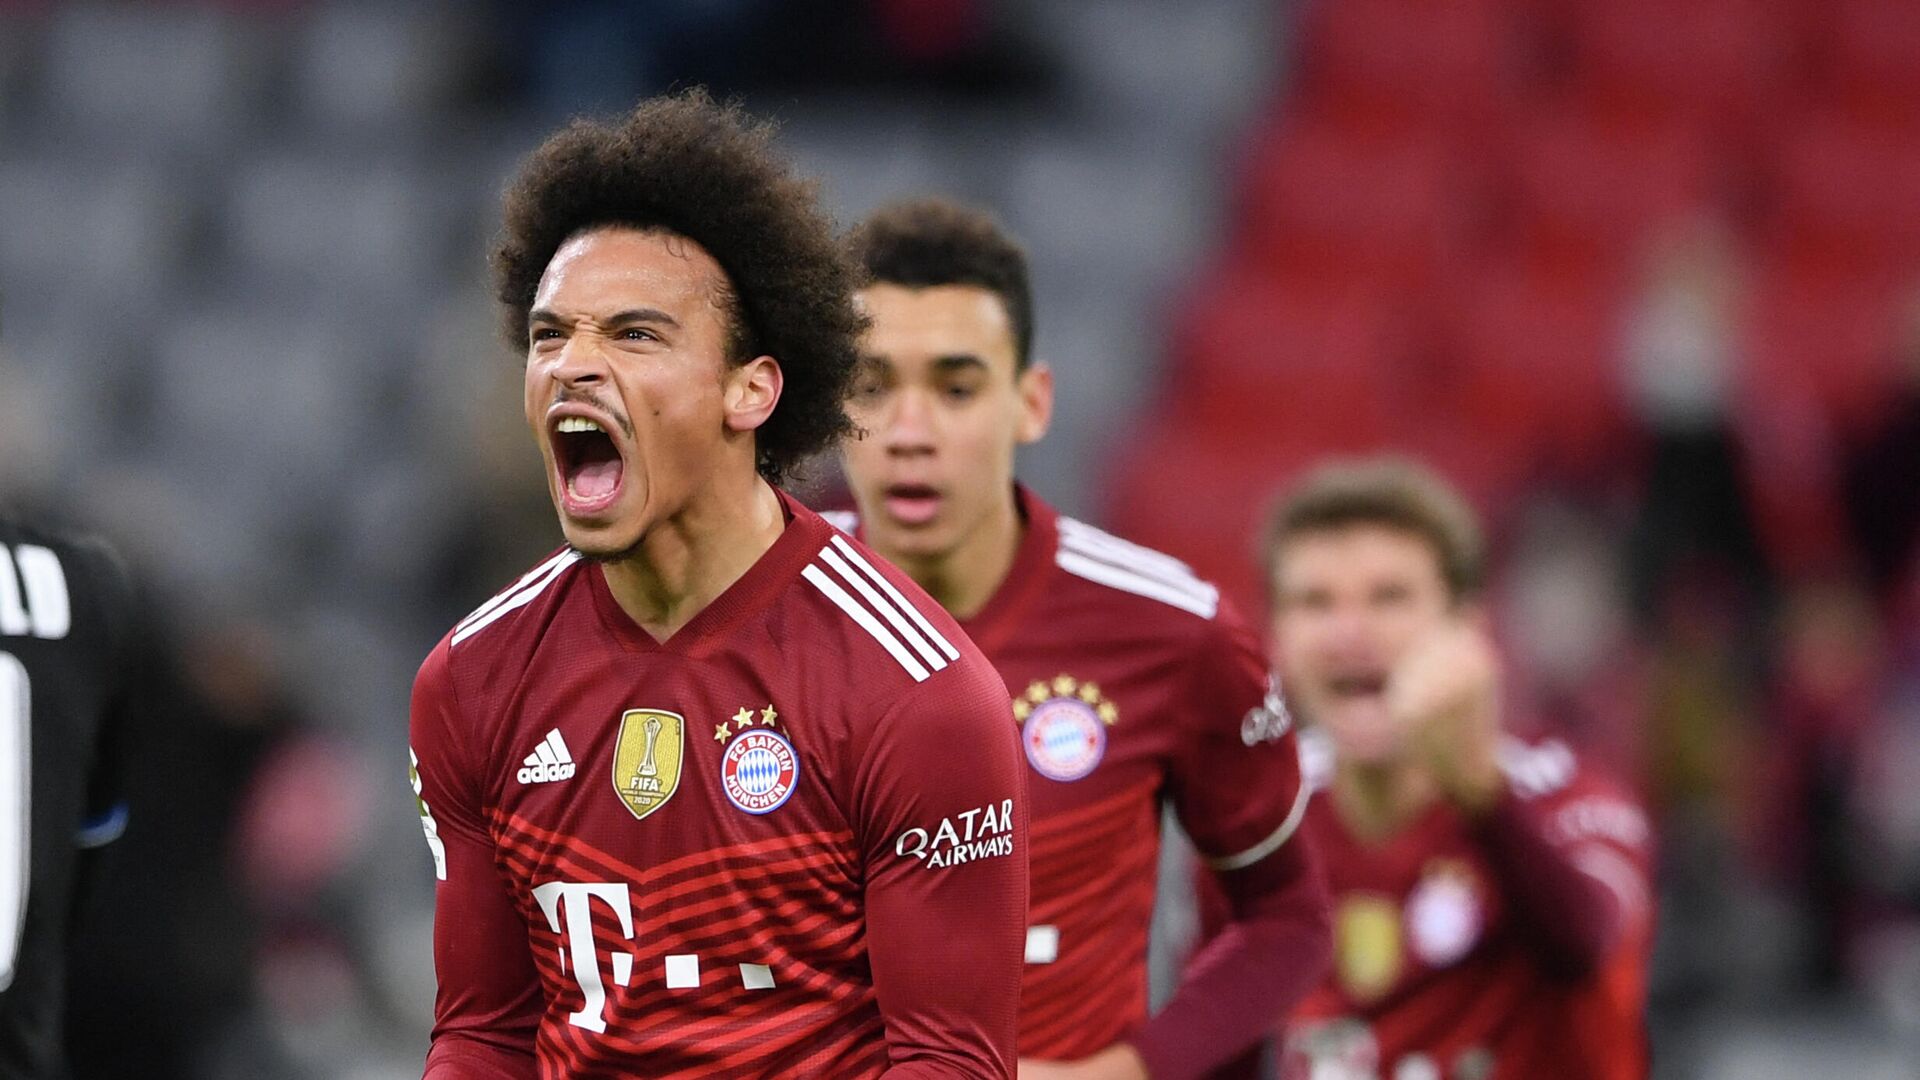 Bayern Munich's German midfielder Leroy Sane celebrates after the first goal during the German first division Bundesliga football match FC Bayern Munich v Arminia Bielefeld in Munich, southern Germany, on November 27, 2021. (Photo by Christof STACHE / AFP) / DFL REGULATIONS PROHIBIT ANY USE OF PHOTOGRAPHS AS IMAGE SEQUENCES AND/OR QUASI-VIDEO - РИА Новости, 1920, 27.11.2021